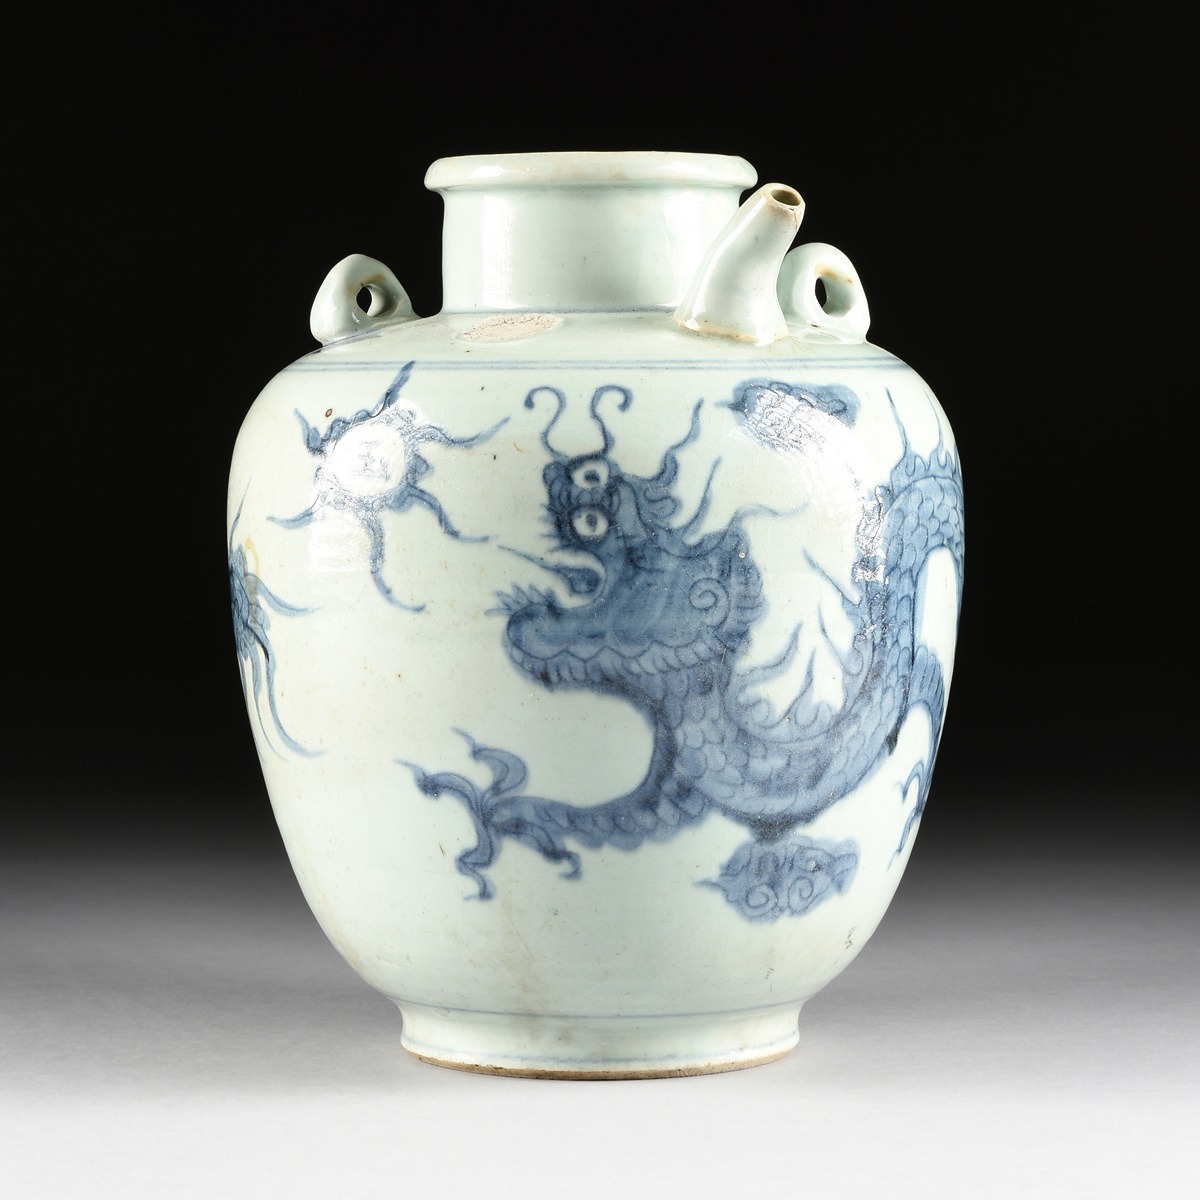 A CHINESE EXPORT BLUE AND WHITE DOUBLE HANDLED WINE/WATER JUG, LATE QING DYNASTY STYLE, the circular